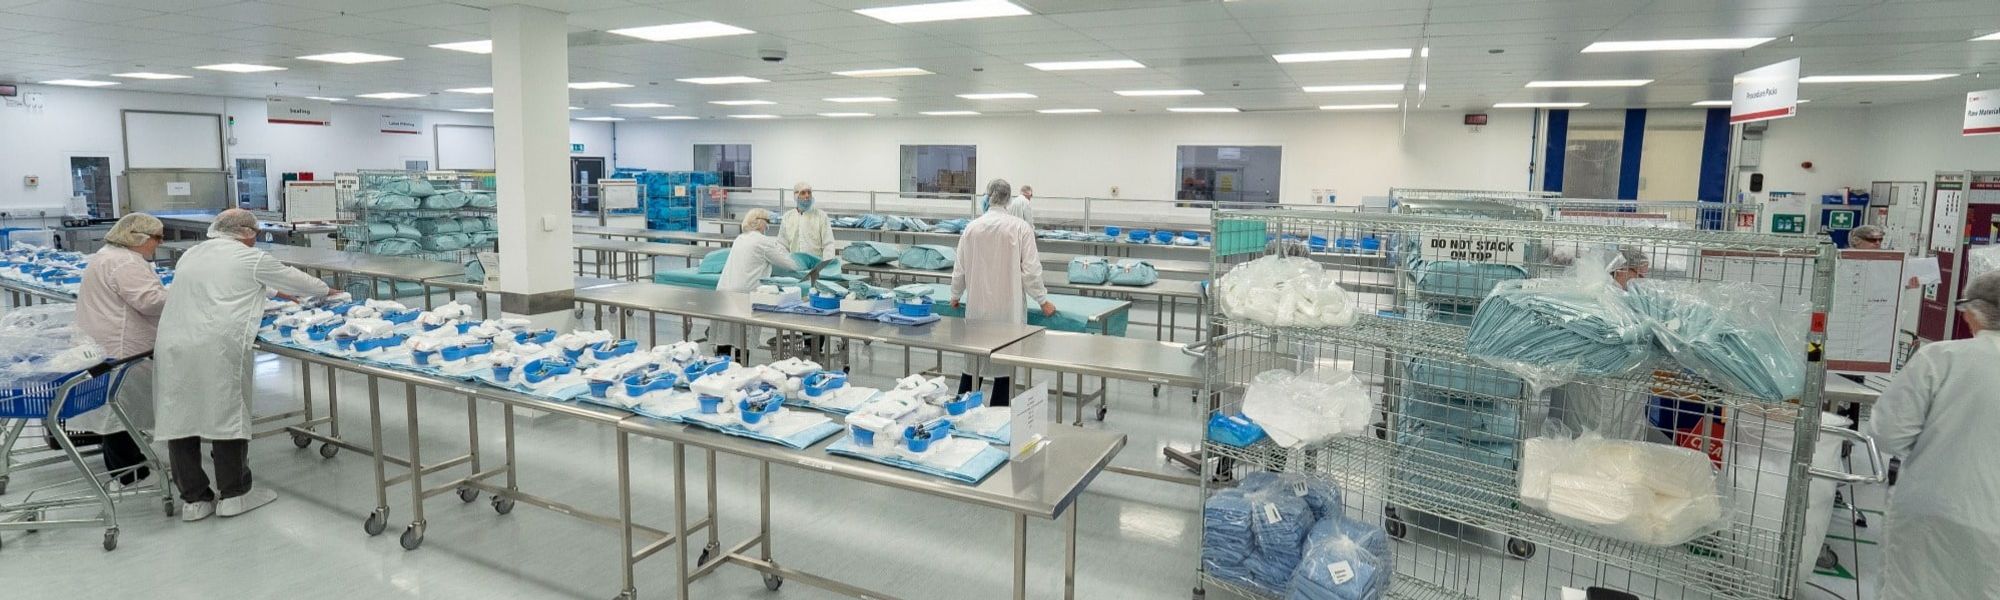 Image of Merit Medical production site in Galway